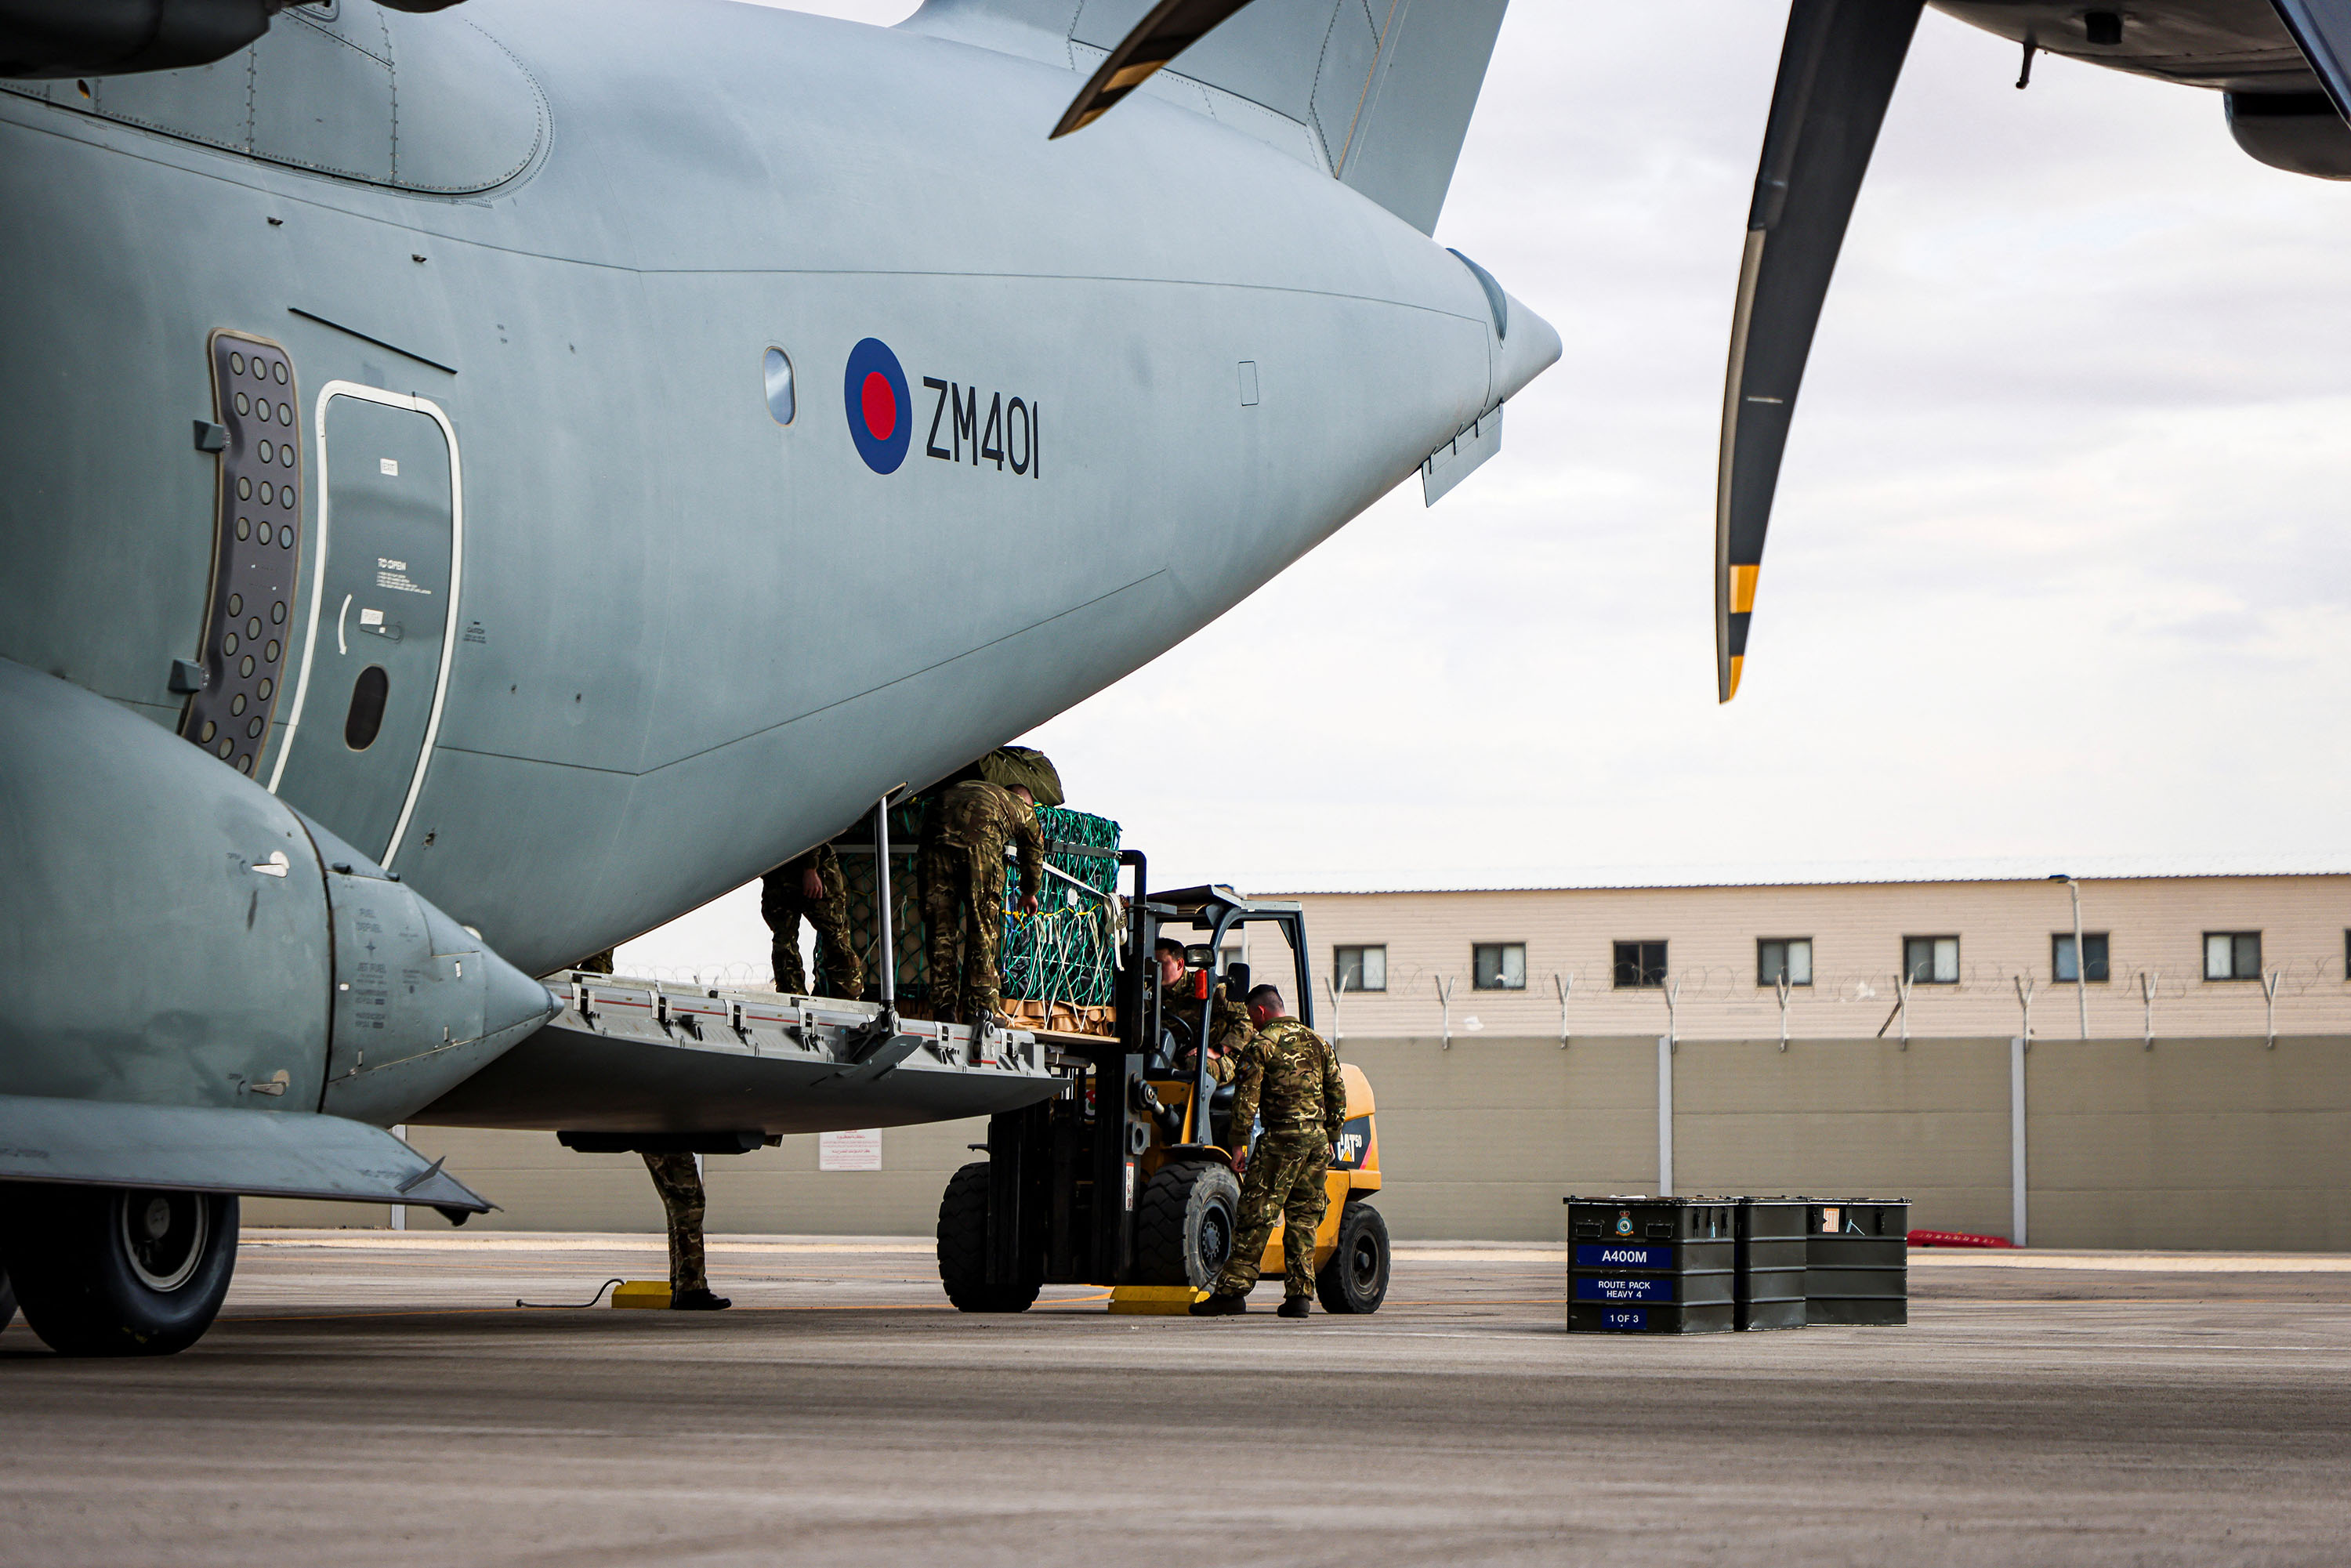 Humanitarian aid is loaded onto a Royal Air Force aircraft in Amman, Jordan, in this handout released on March 26.